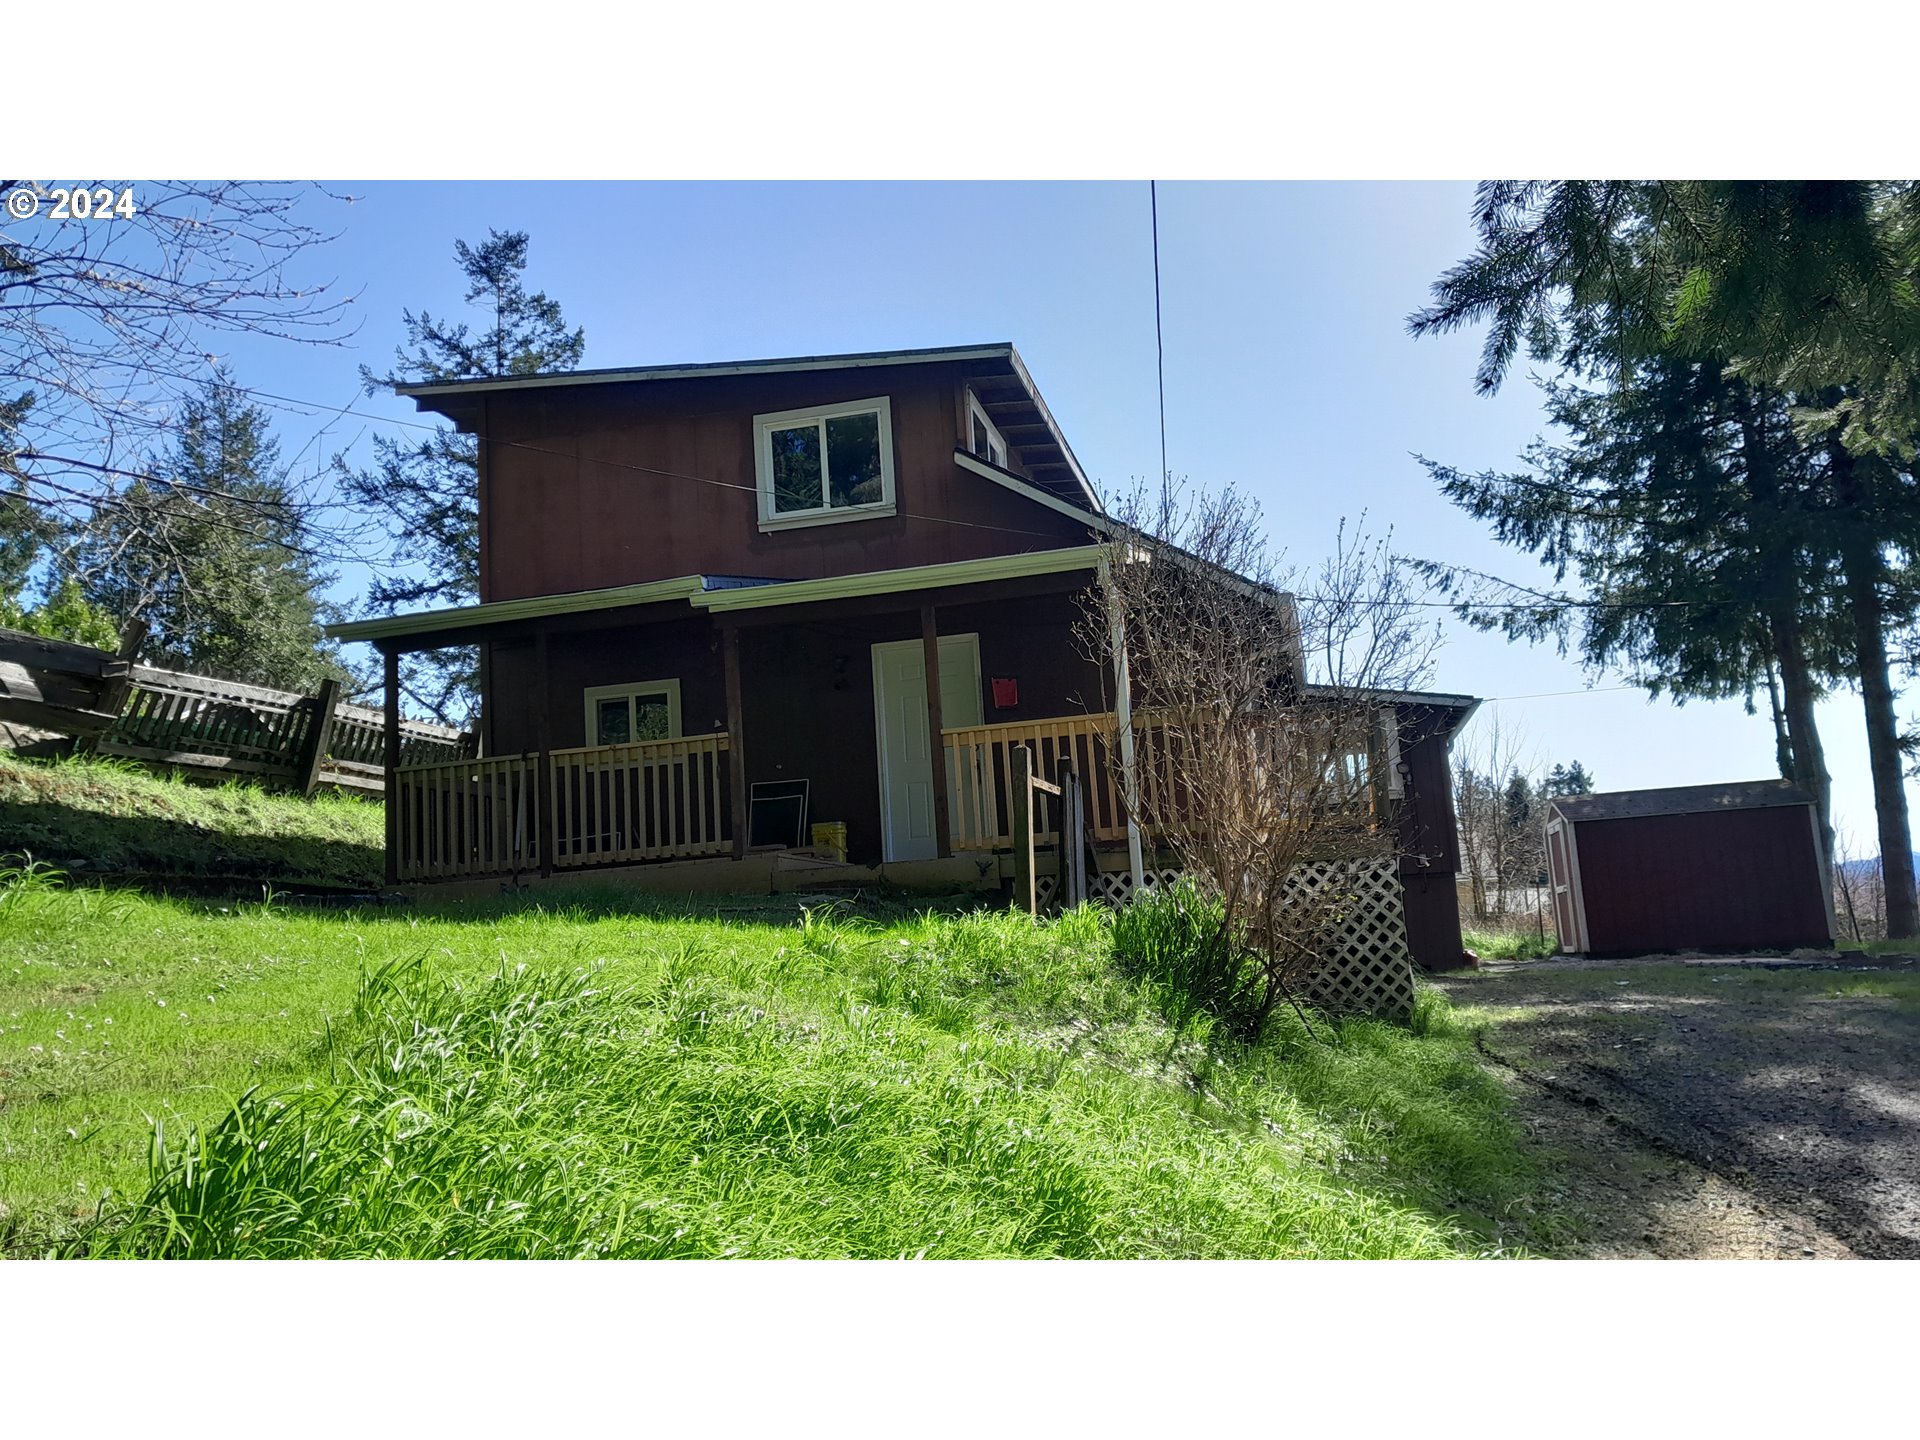 883 E 11TH ST, Coquille, OR 